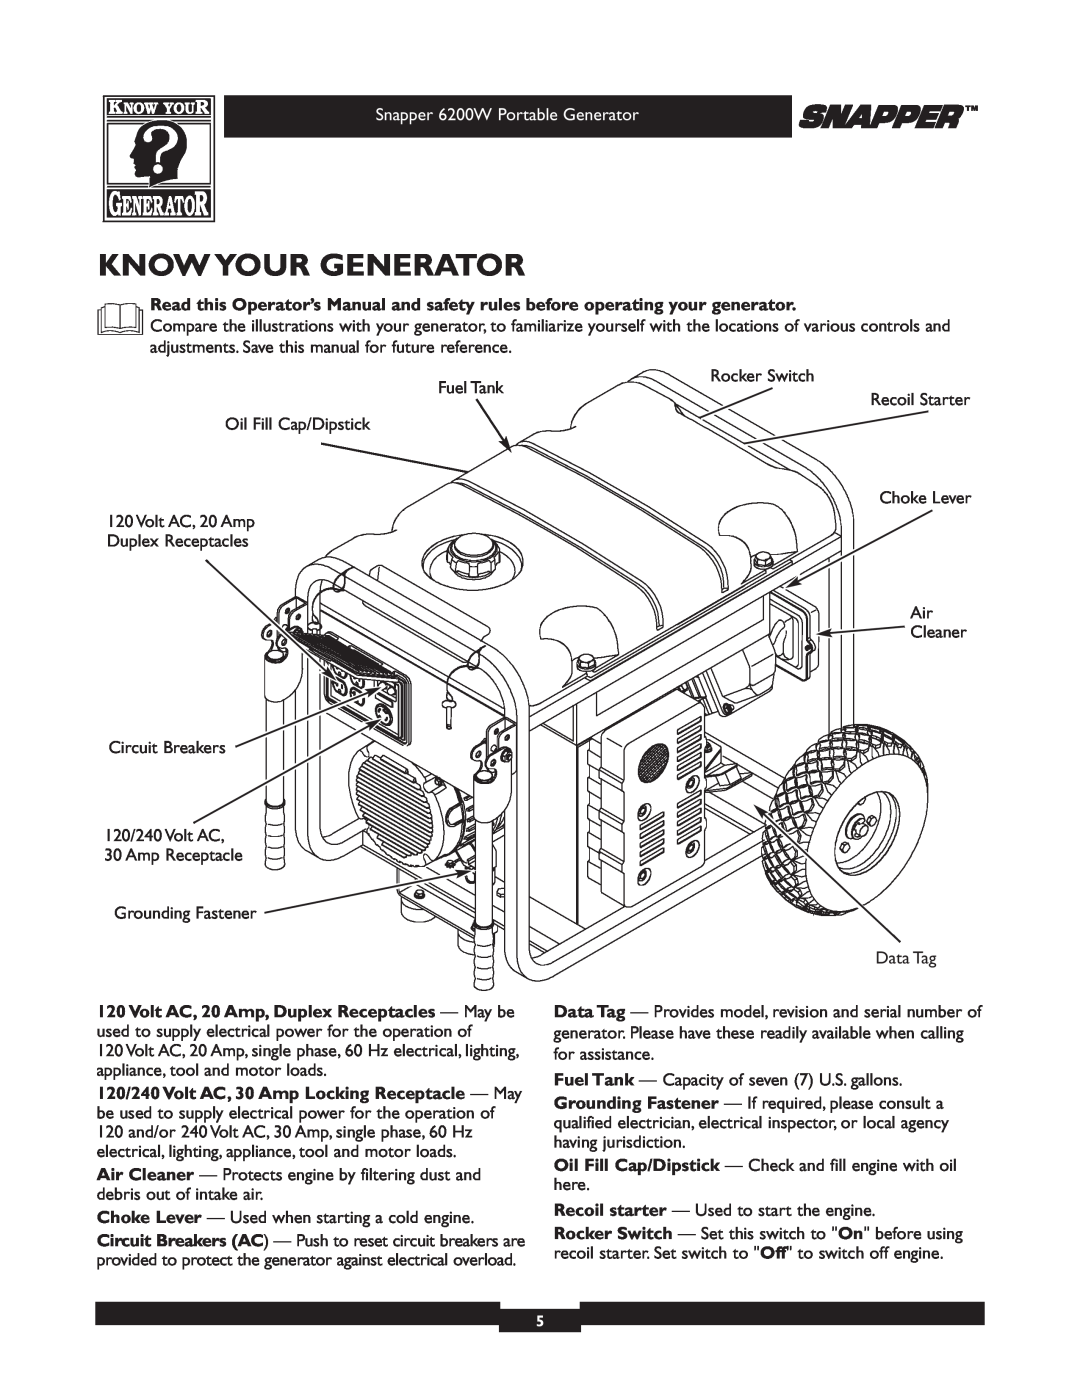 Snapper 30216 manual Know Your Generator, Snapper 6200W Portable Generator 